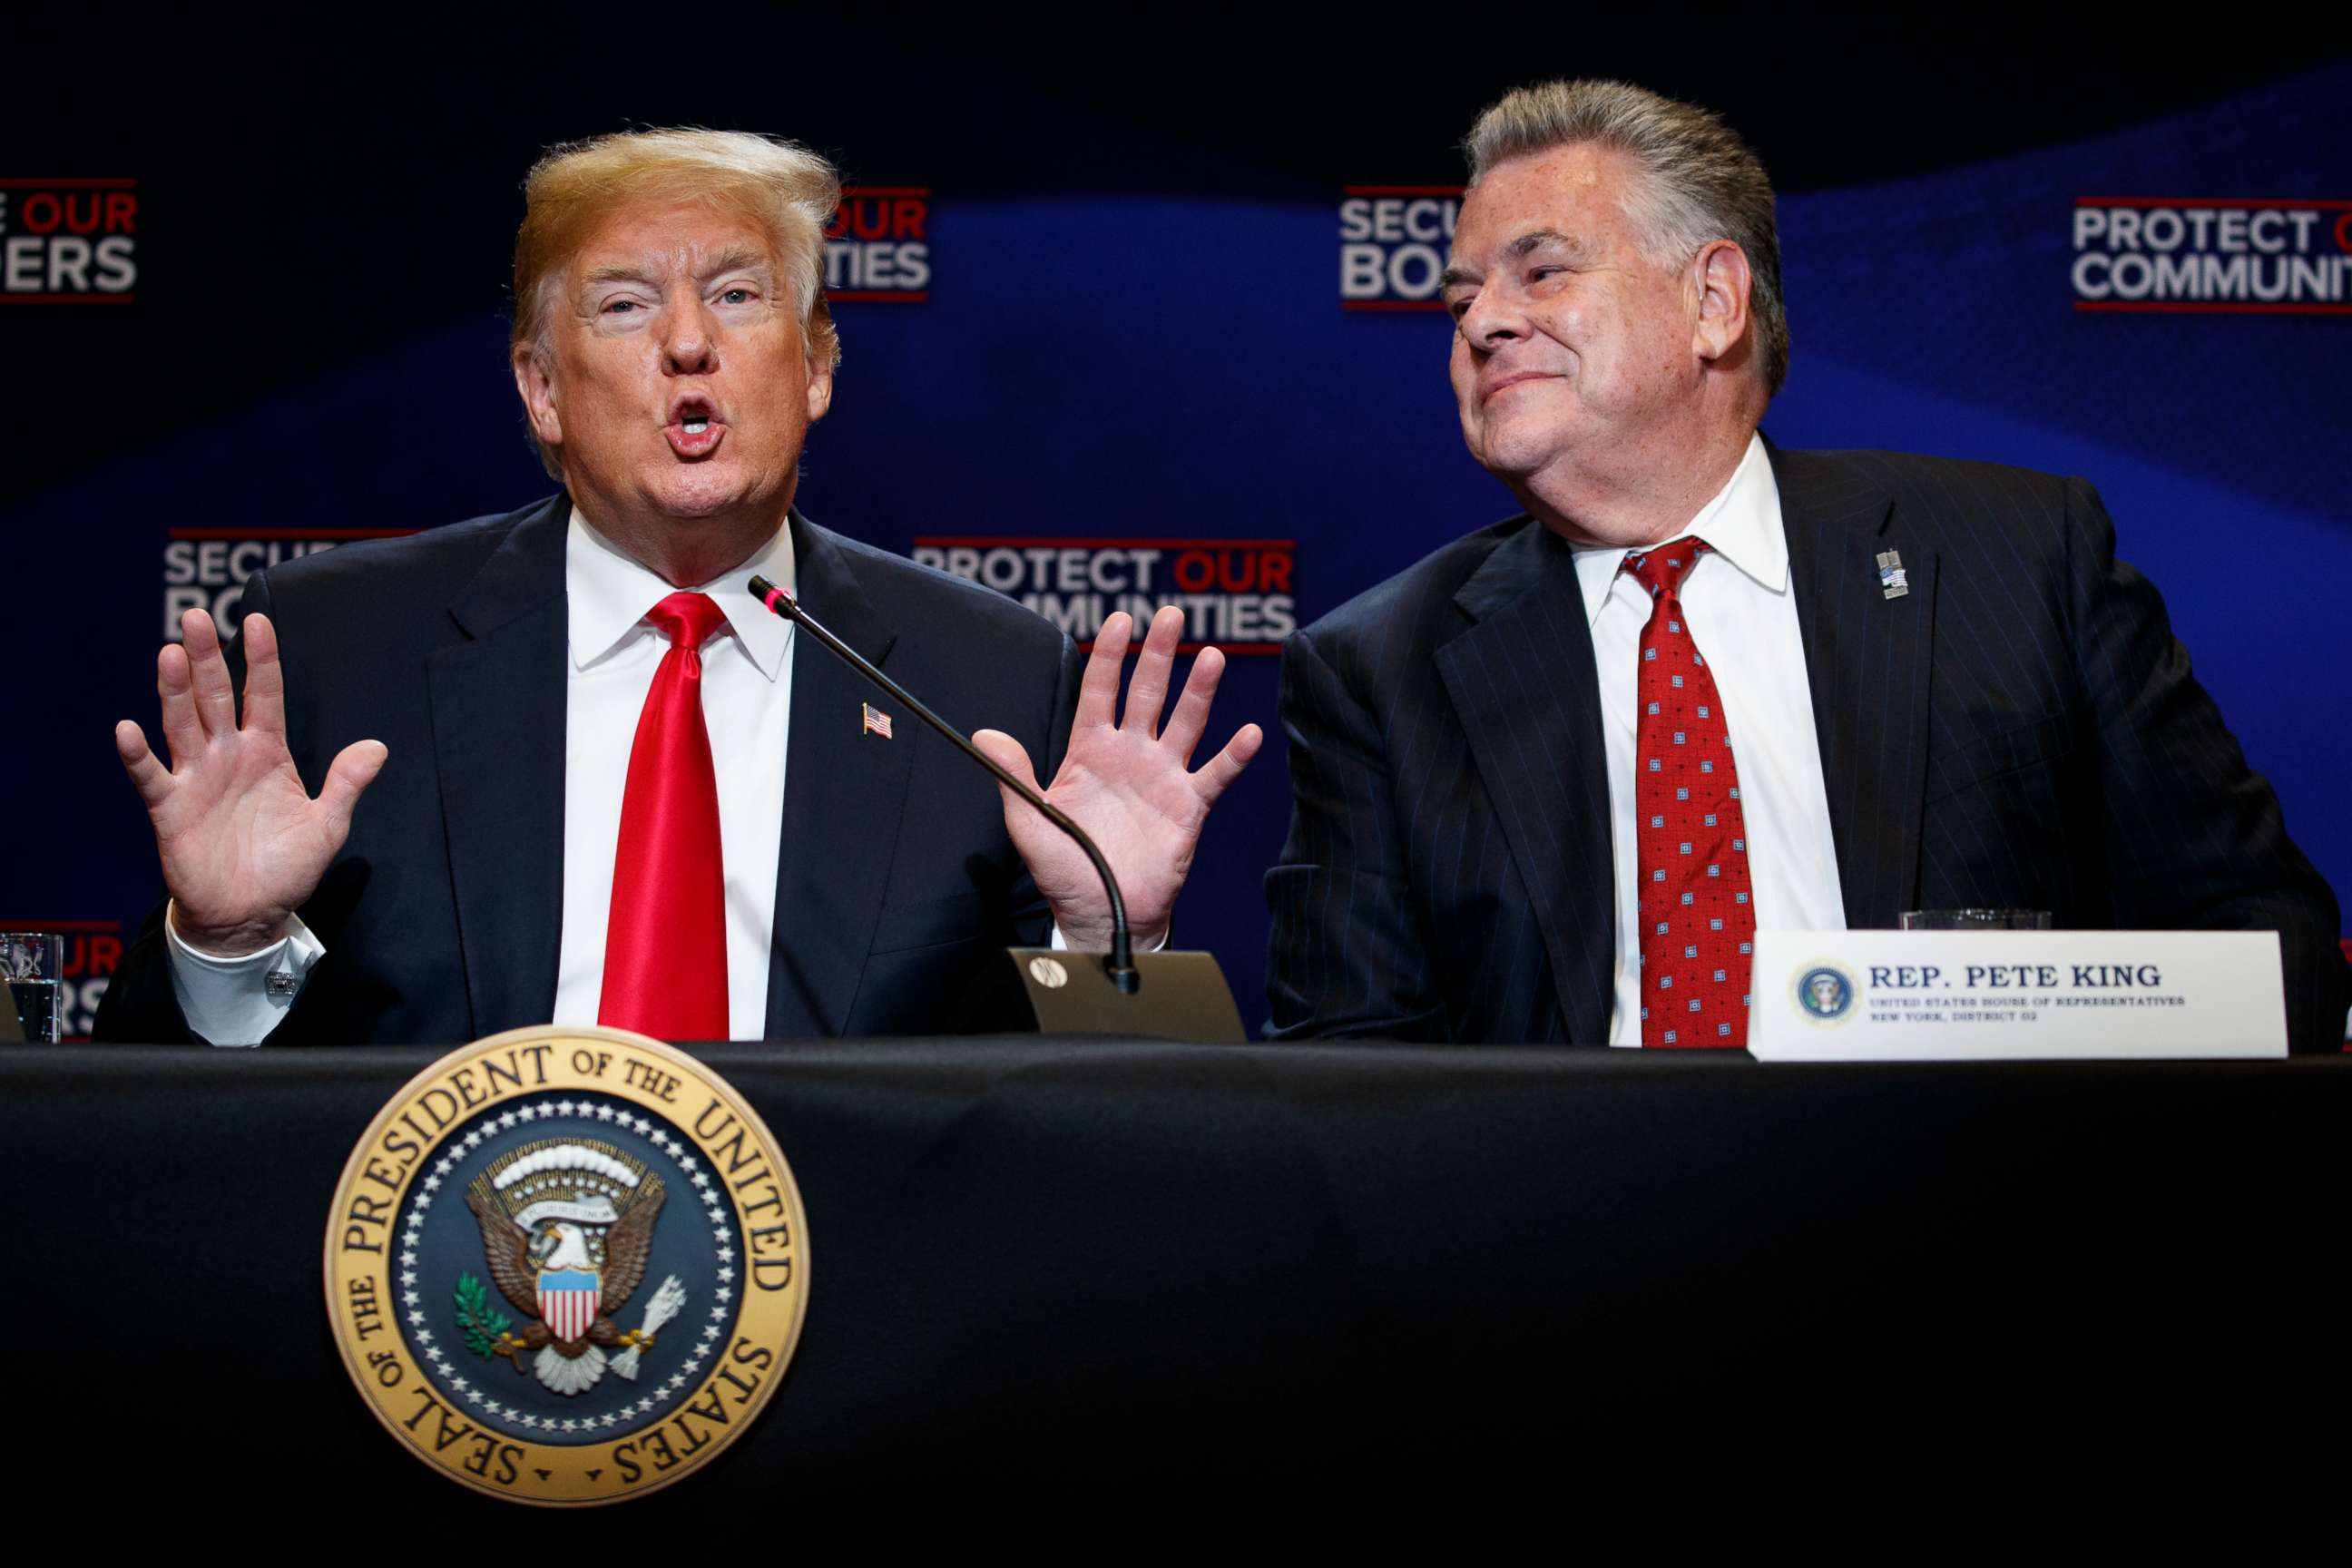 PHOTO: In this May 23, 2018, file photo, Rep. Peter King, R-N.Y., right, listens as President Donald Trump speaks during a roundtable on immigration policy at Morrelly Homeland Security Center in Bethpage, N.Y. (AP Photo/Evan Vucci, File)